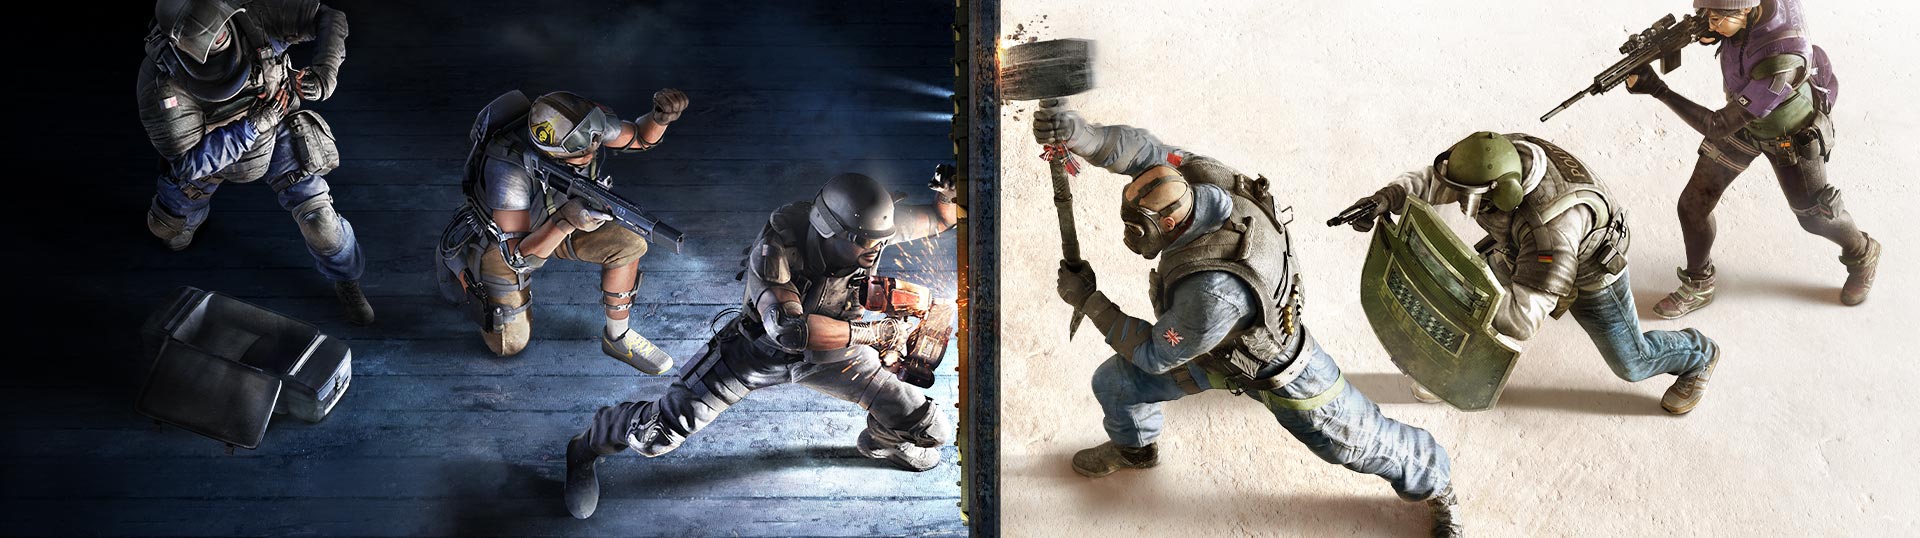 Buy Rainbow Six Siege for PC | Ubisoft Official Store